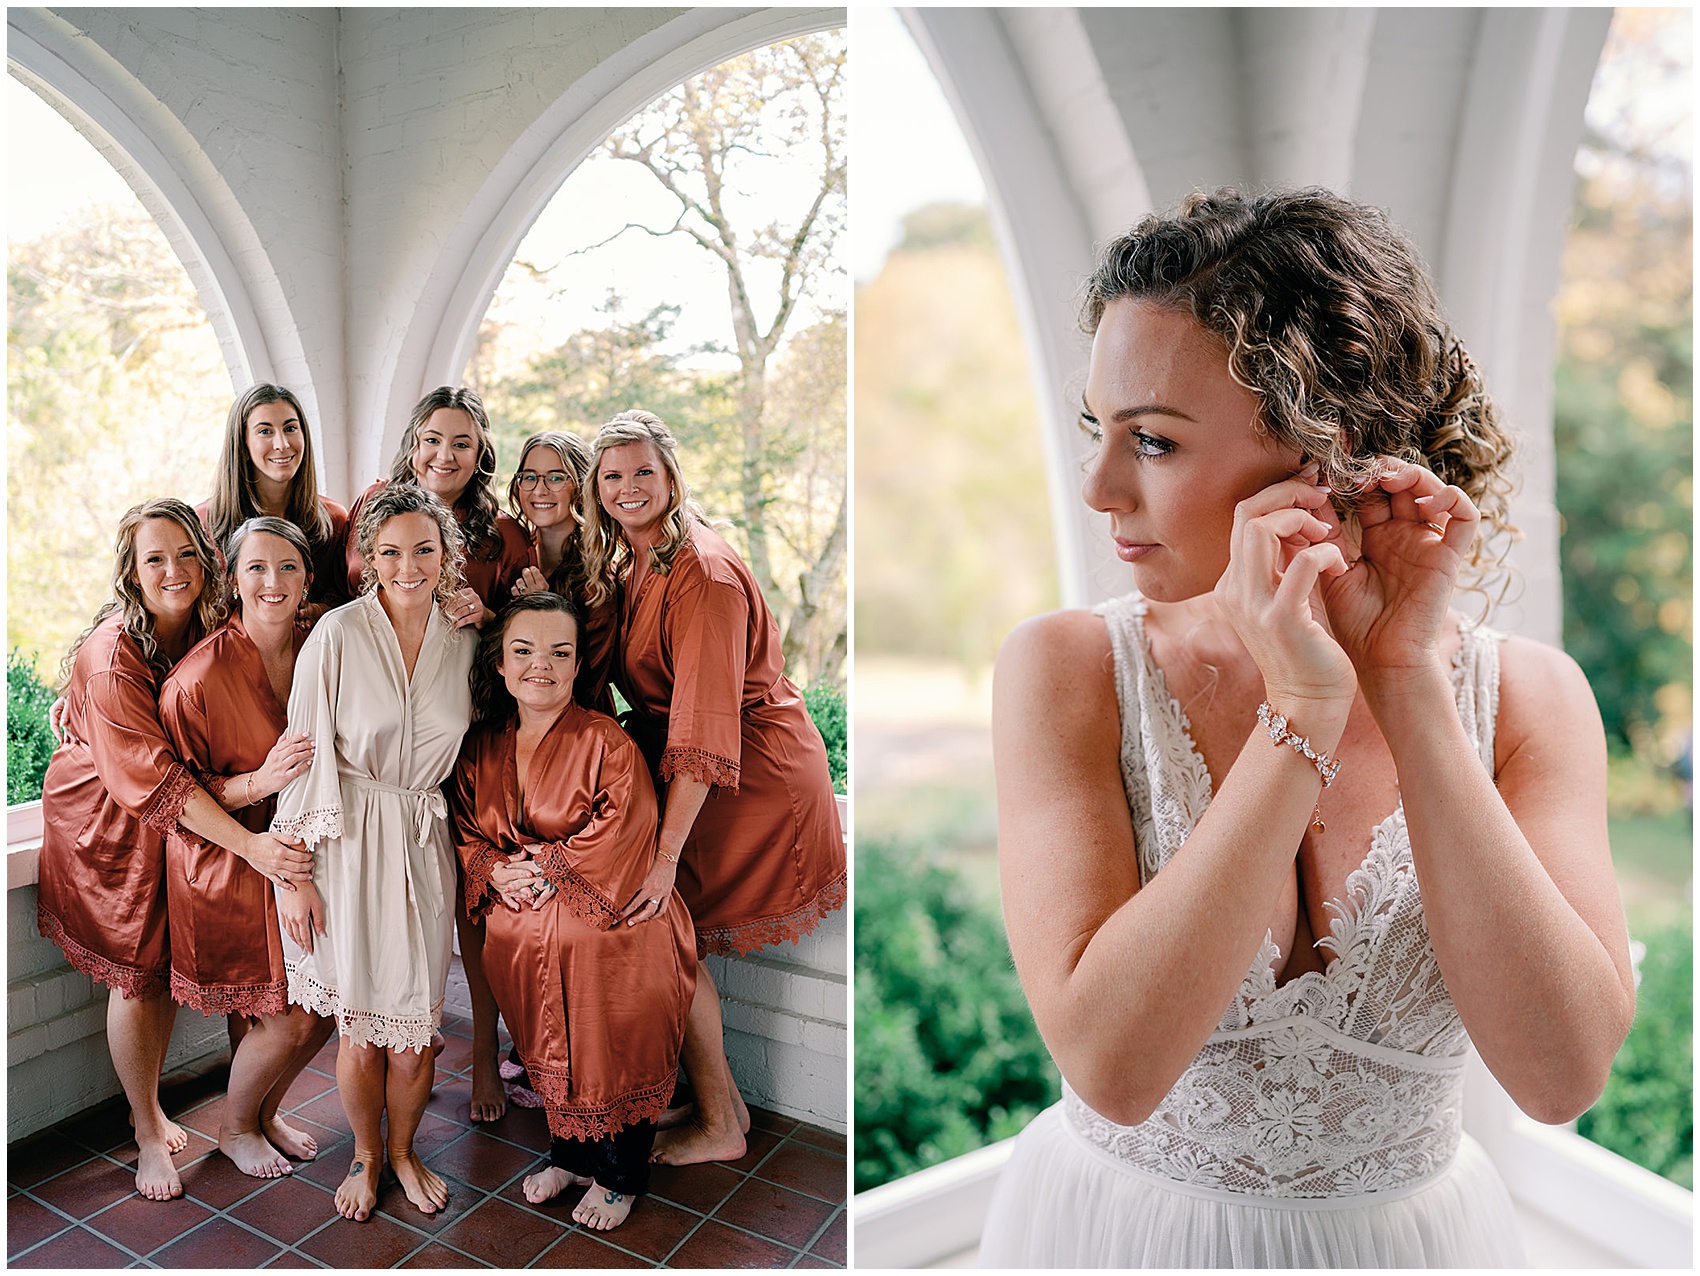 A bride stands with her wedding party in matching pajamas and puts on her earrings in a window